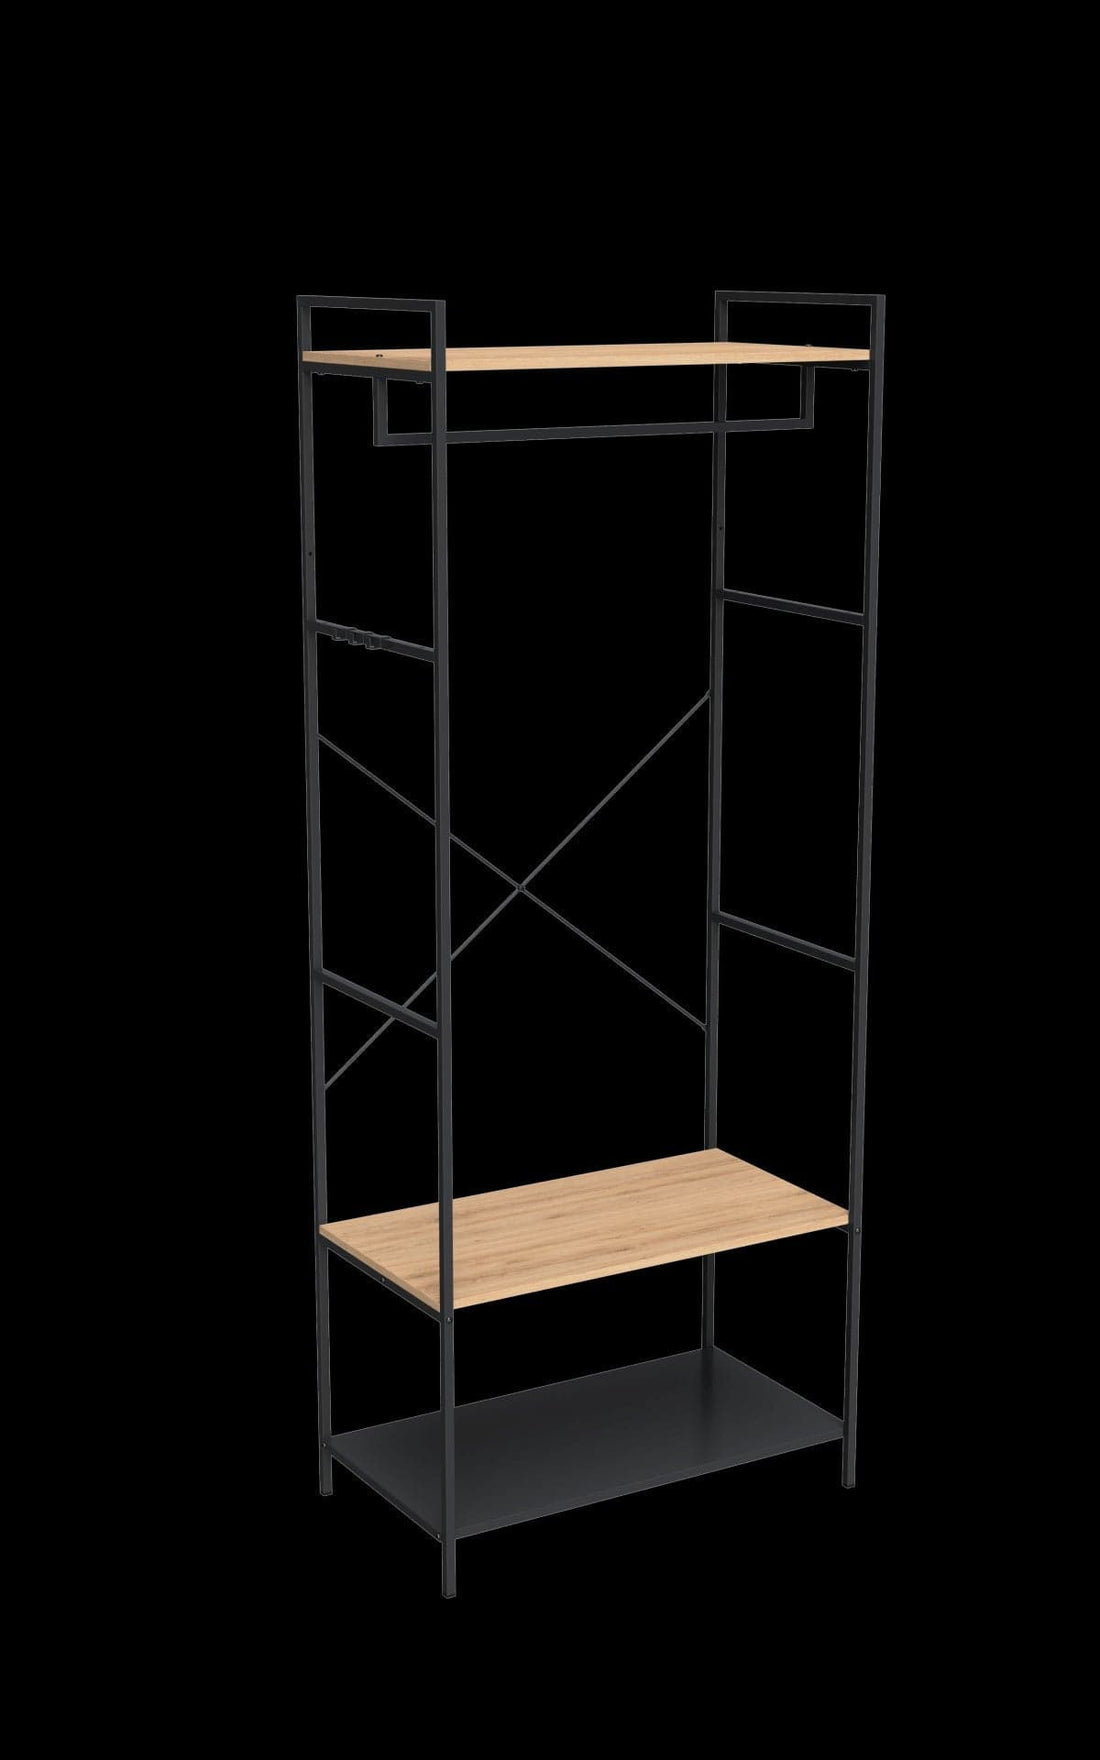 CLOTHING STAND W80xD45xH200 BLACK METAL/WOOD SPACEO - best price from Maltashopper.com BR410007444